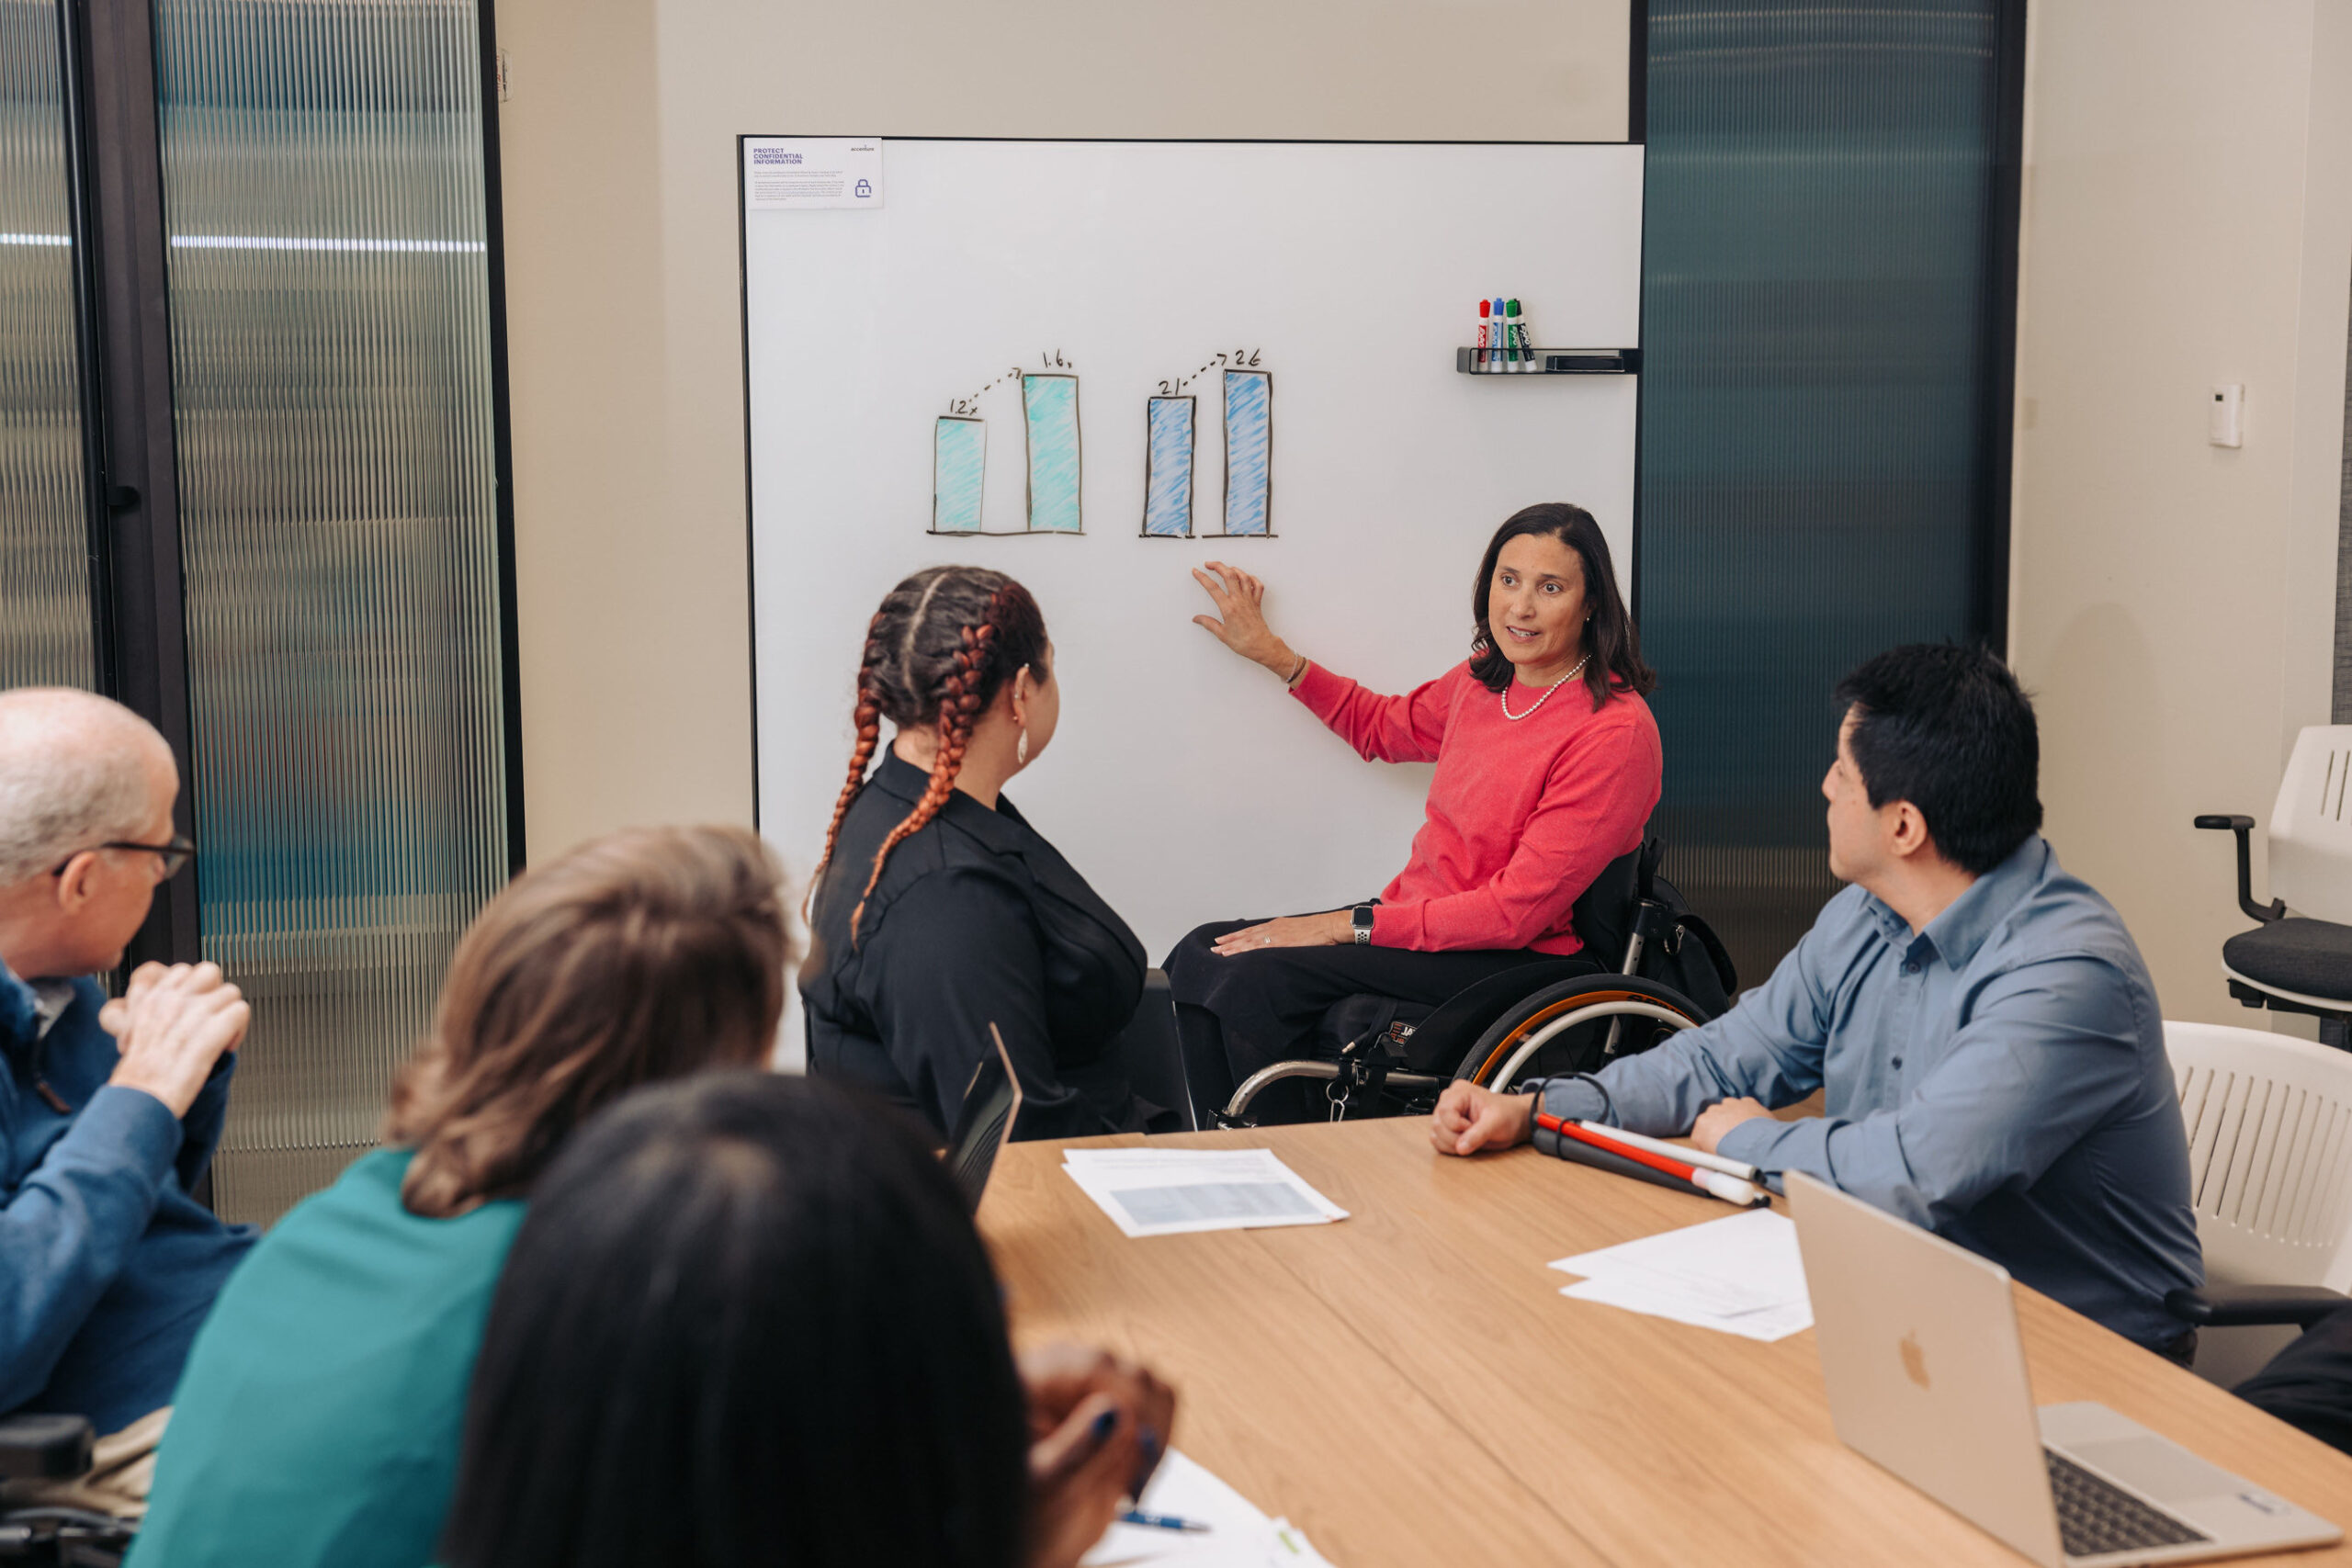 A woman using a wheelchair presents data to her colleagues during a meeting. She gestures to illustrates visualizations on a whiteboard behind her.